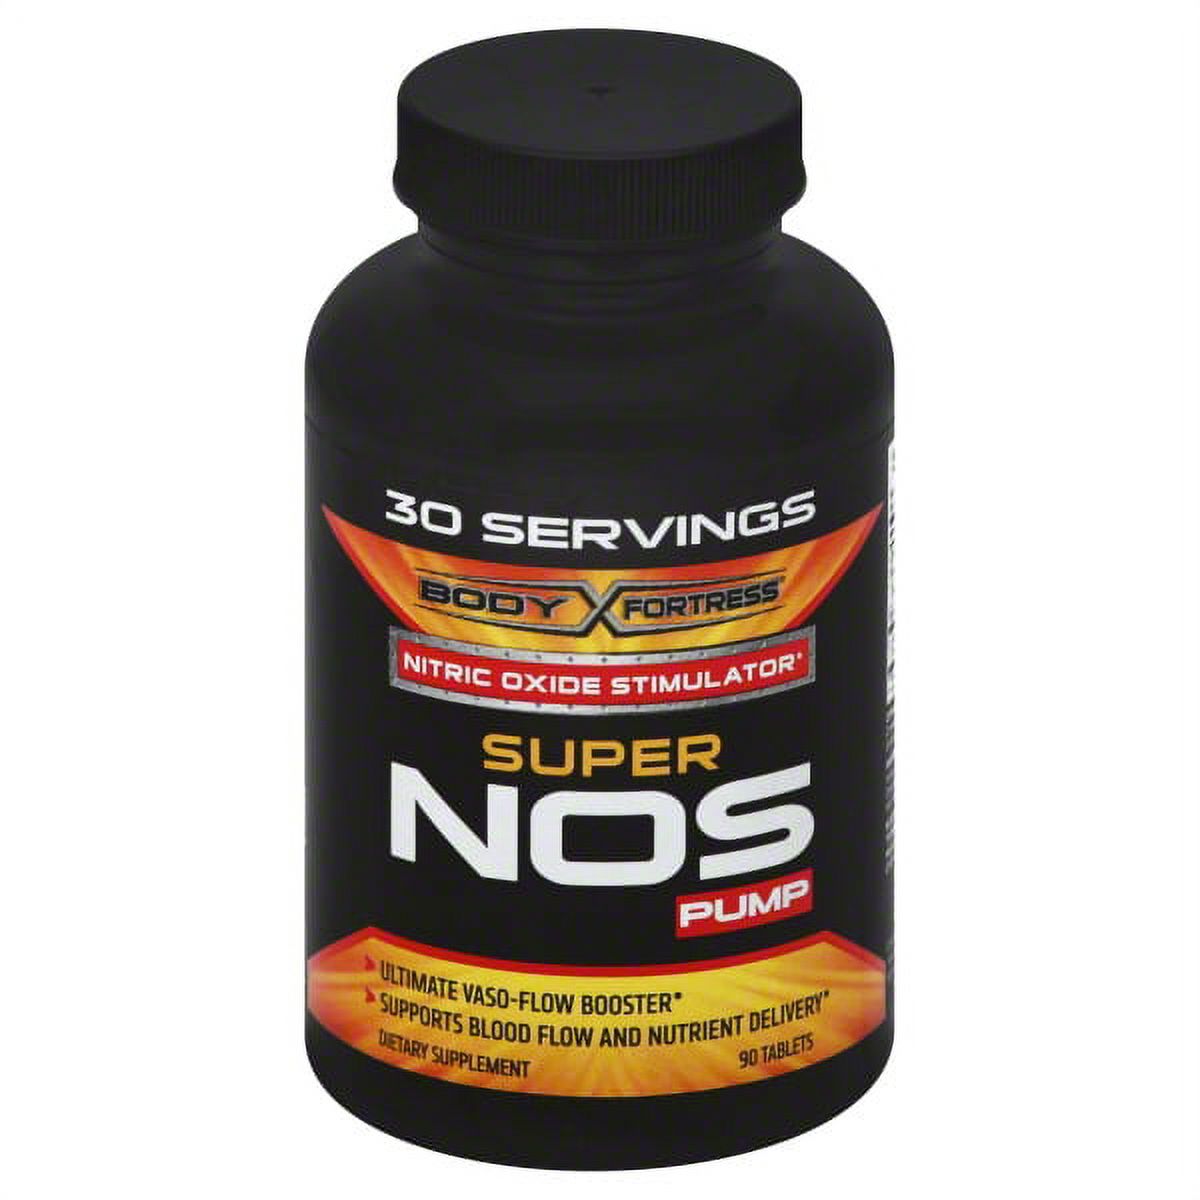 US Nutrition Body Fortress  Super NOS Pump, 90 ea - image 1 of 5